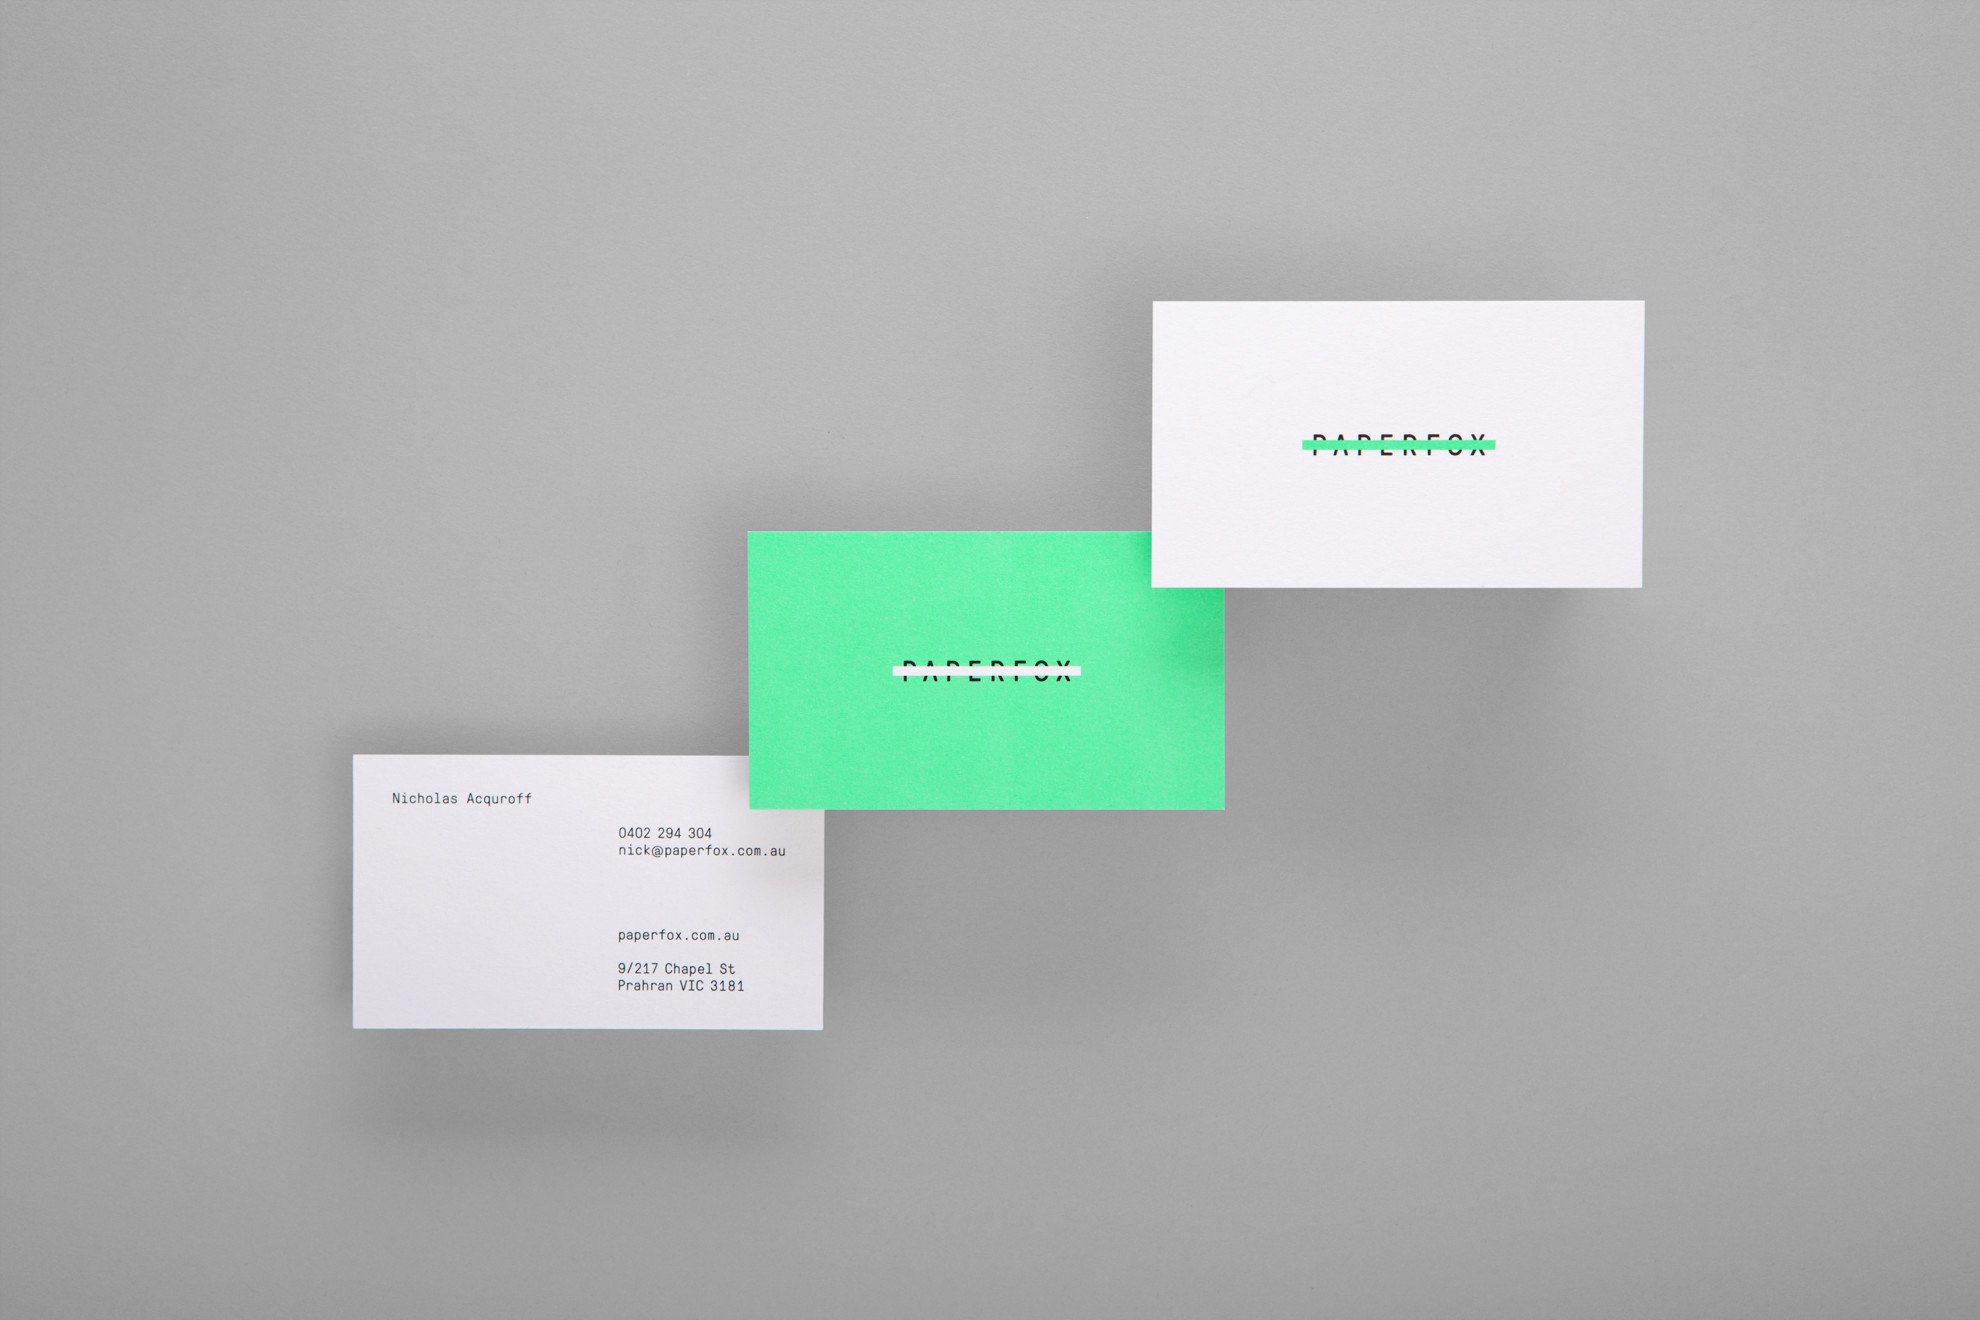 Paperfox - Business Cards